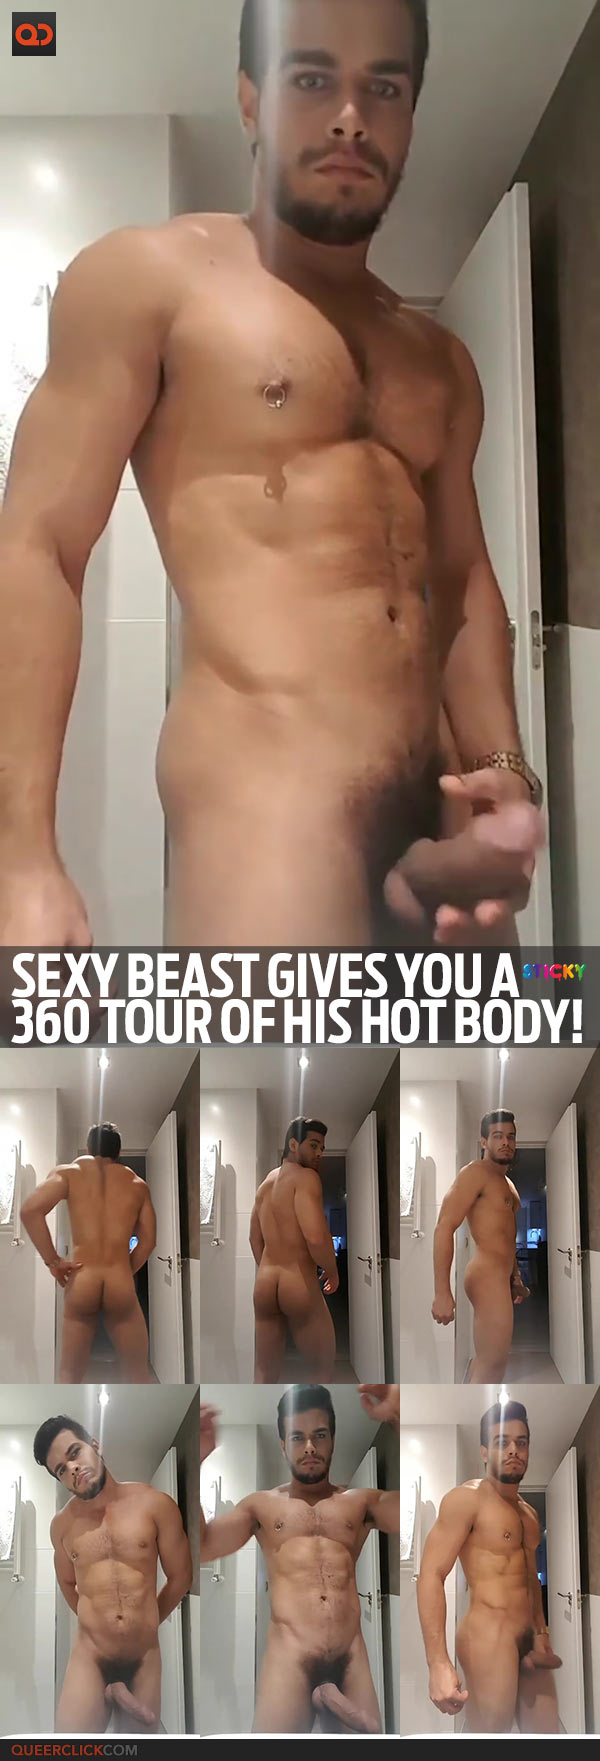 Sexy Beast Gives You A 360 Tour Of His Hot Body!